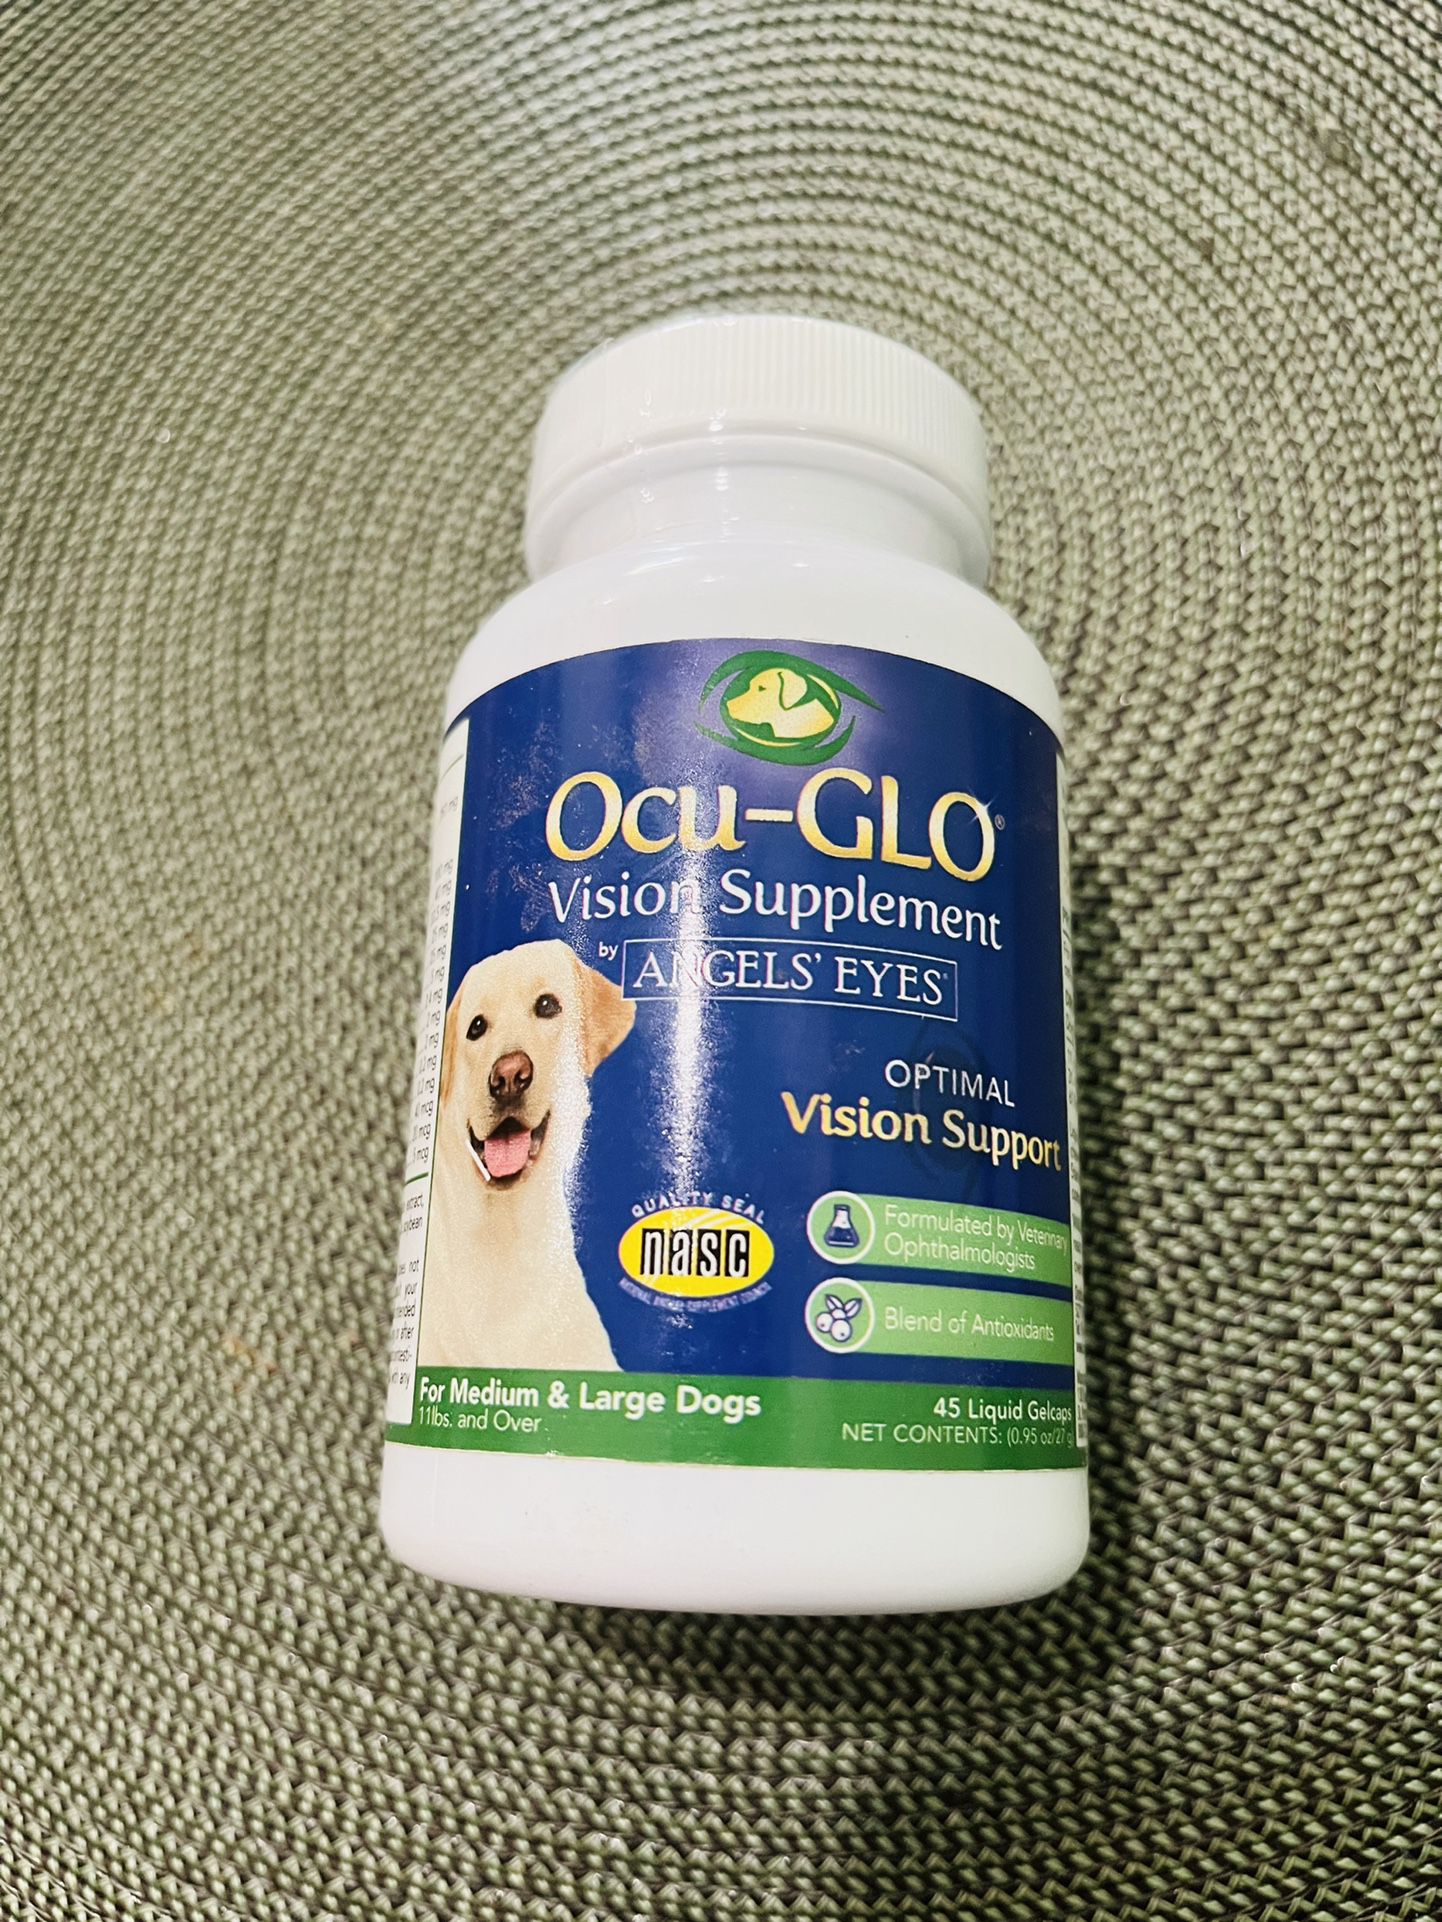 New And Sealed Ocu-Glo Vision Supplement 